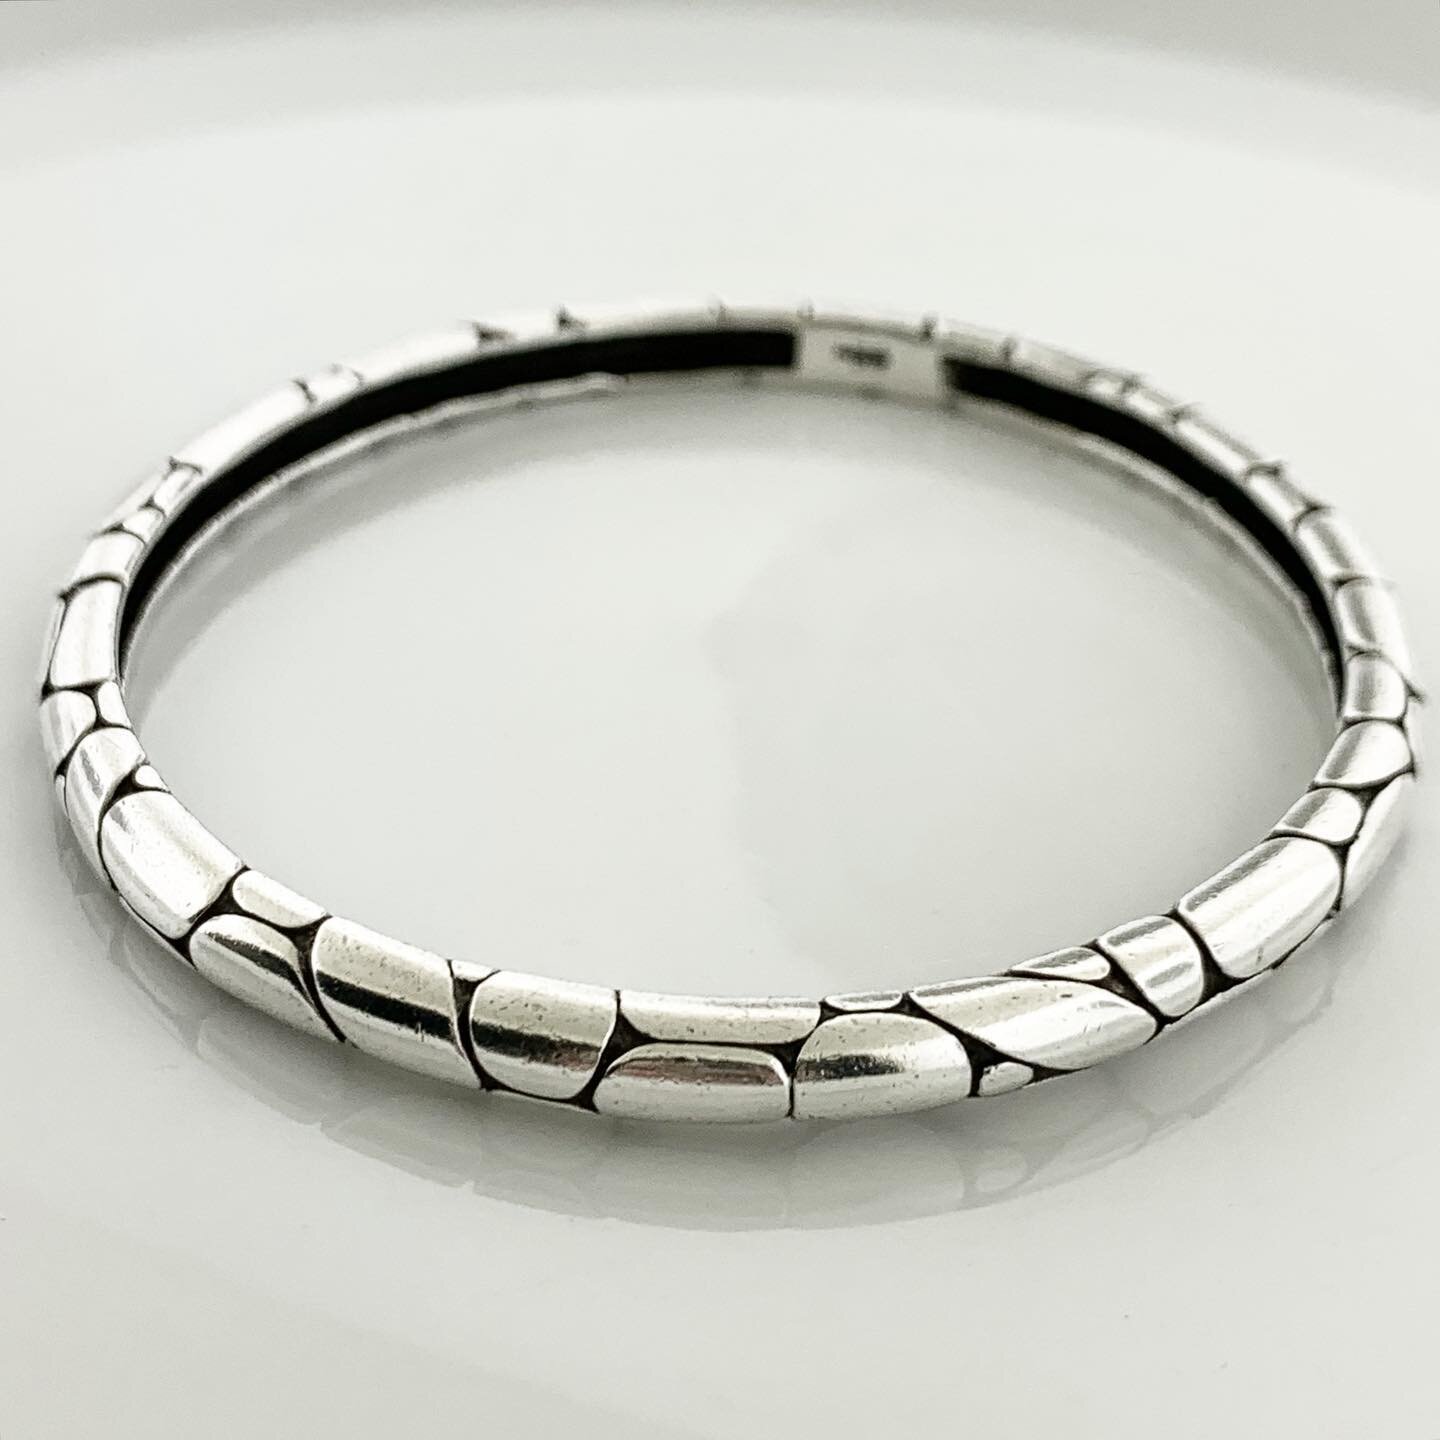 Estate John Hardy Sterling Silver Pebble Textured Bangle Bracelet 

DM to inquire